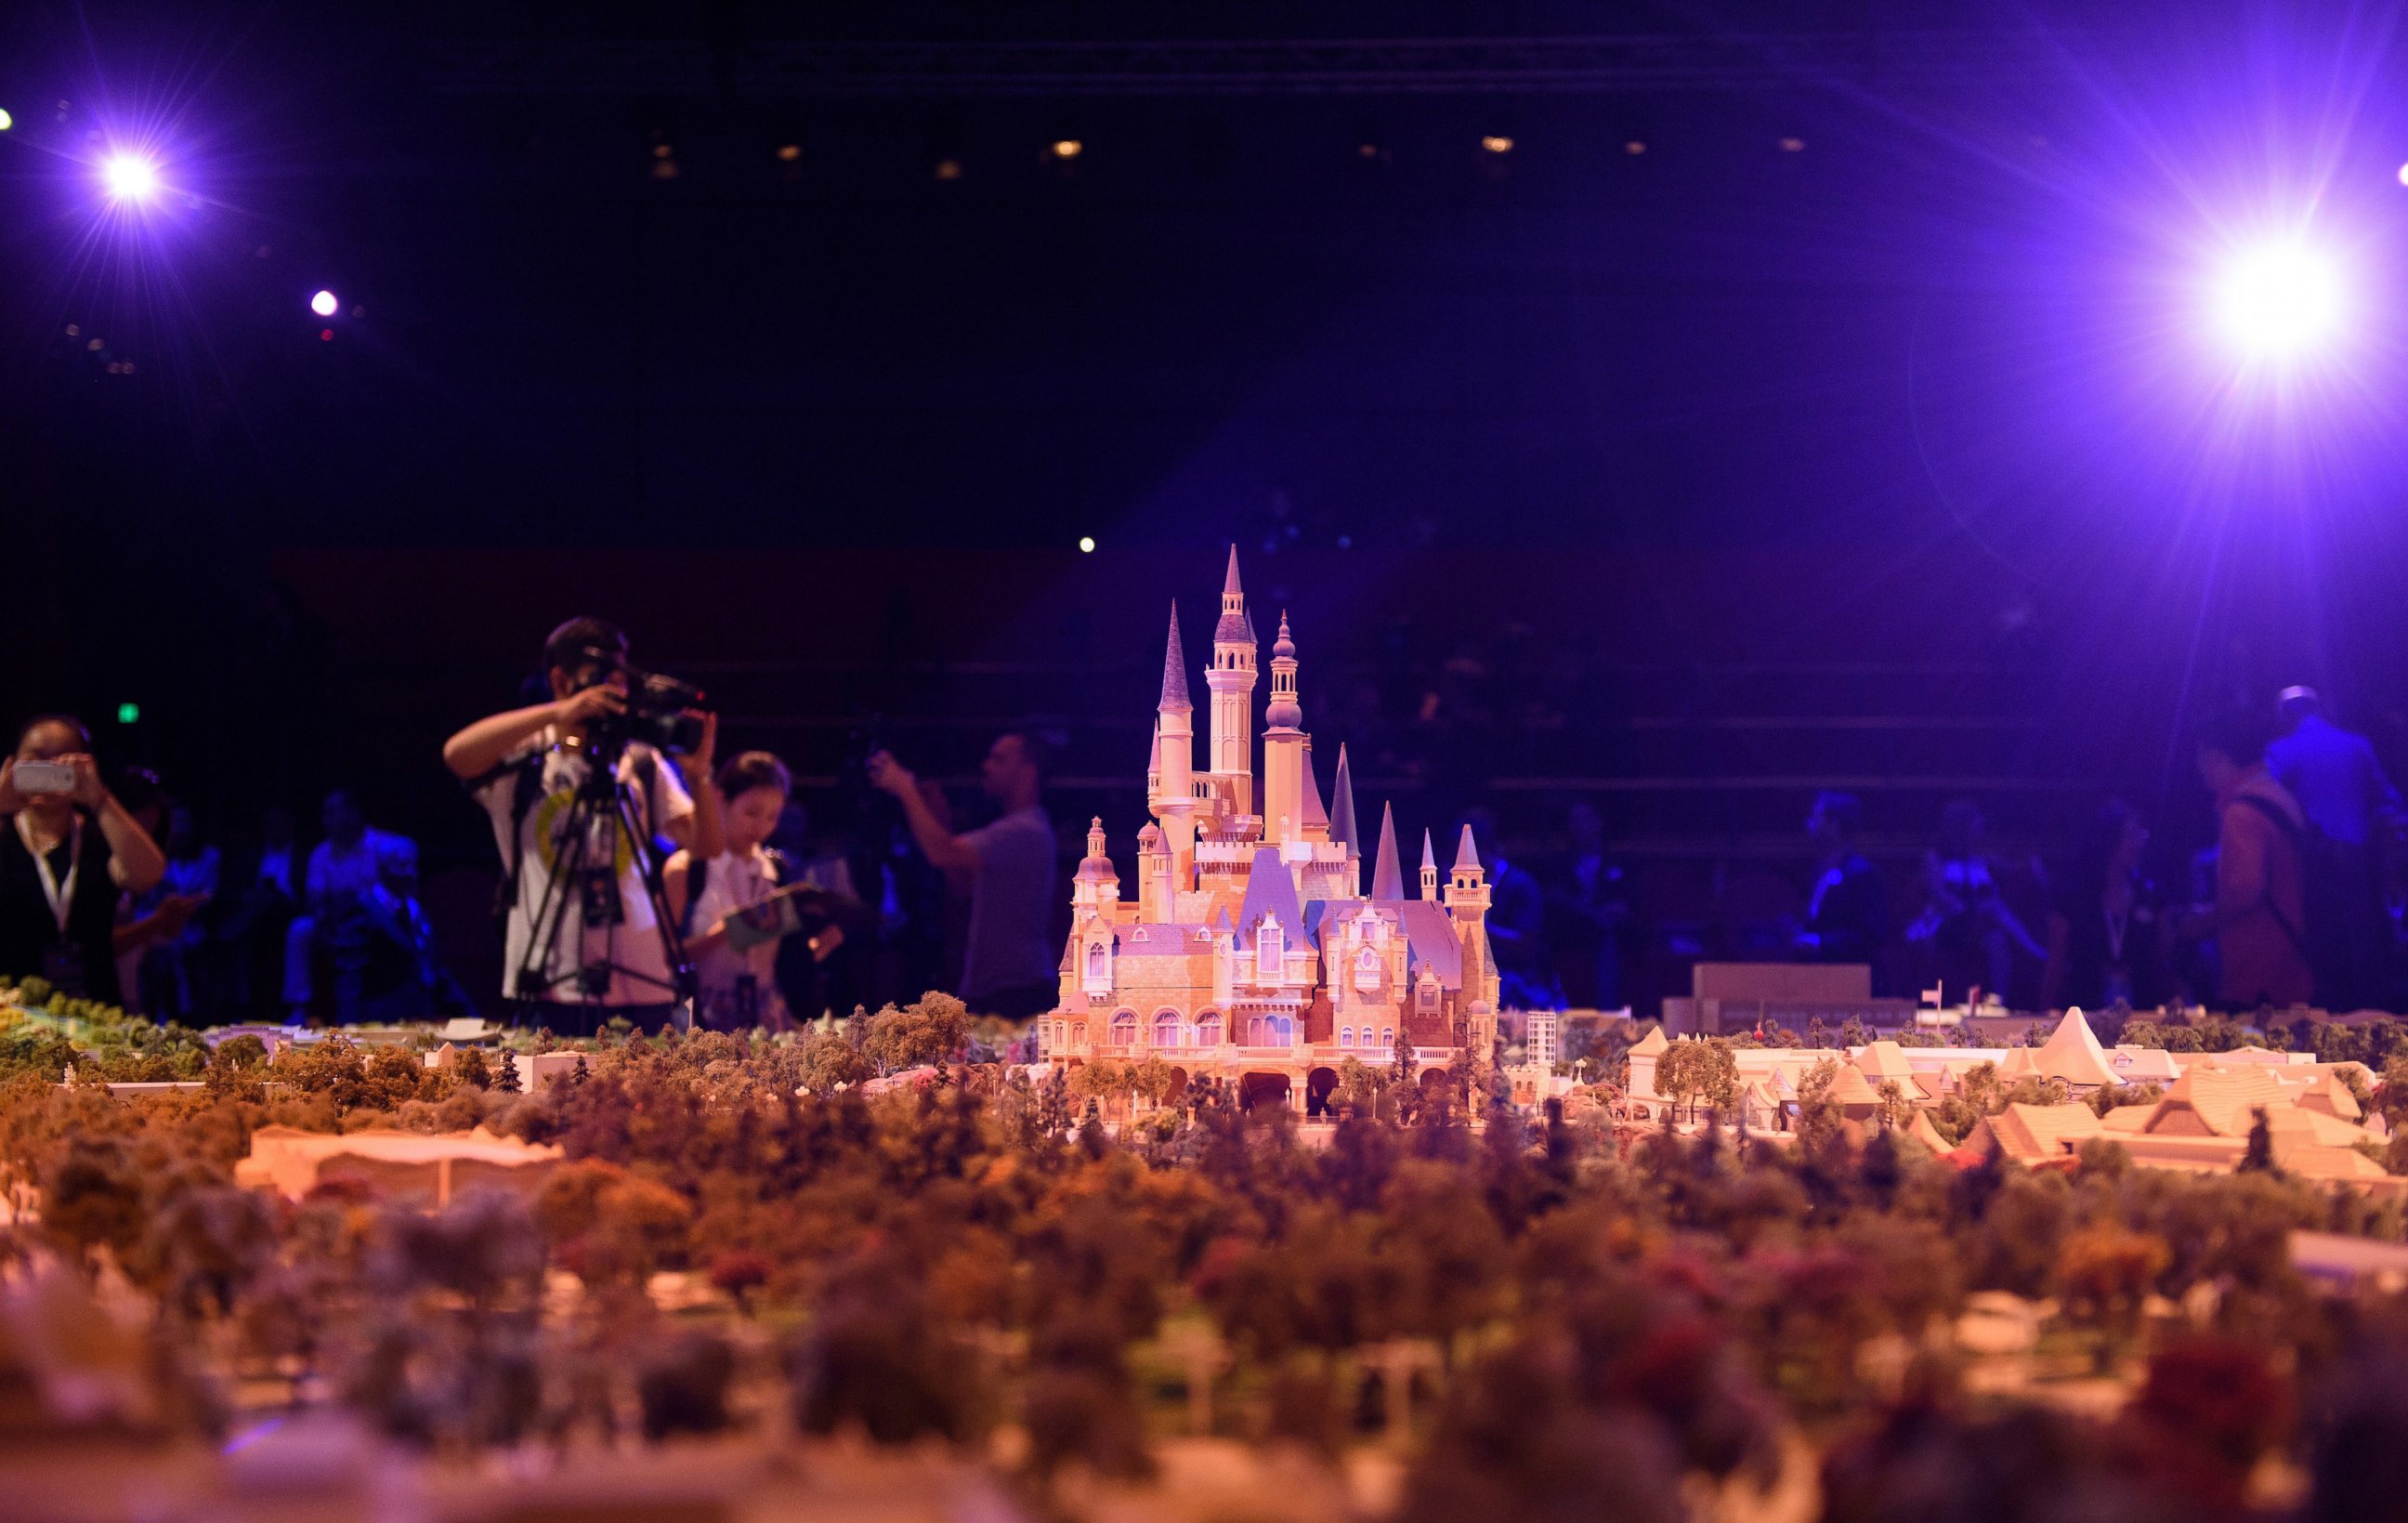 PHOTO: Members of the media take images of a model of the Shanghai Disney Resort during a press event in Shanghai, July 15, 2015.